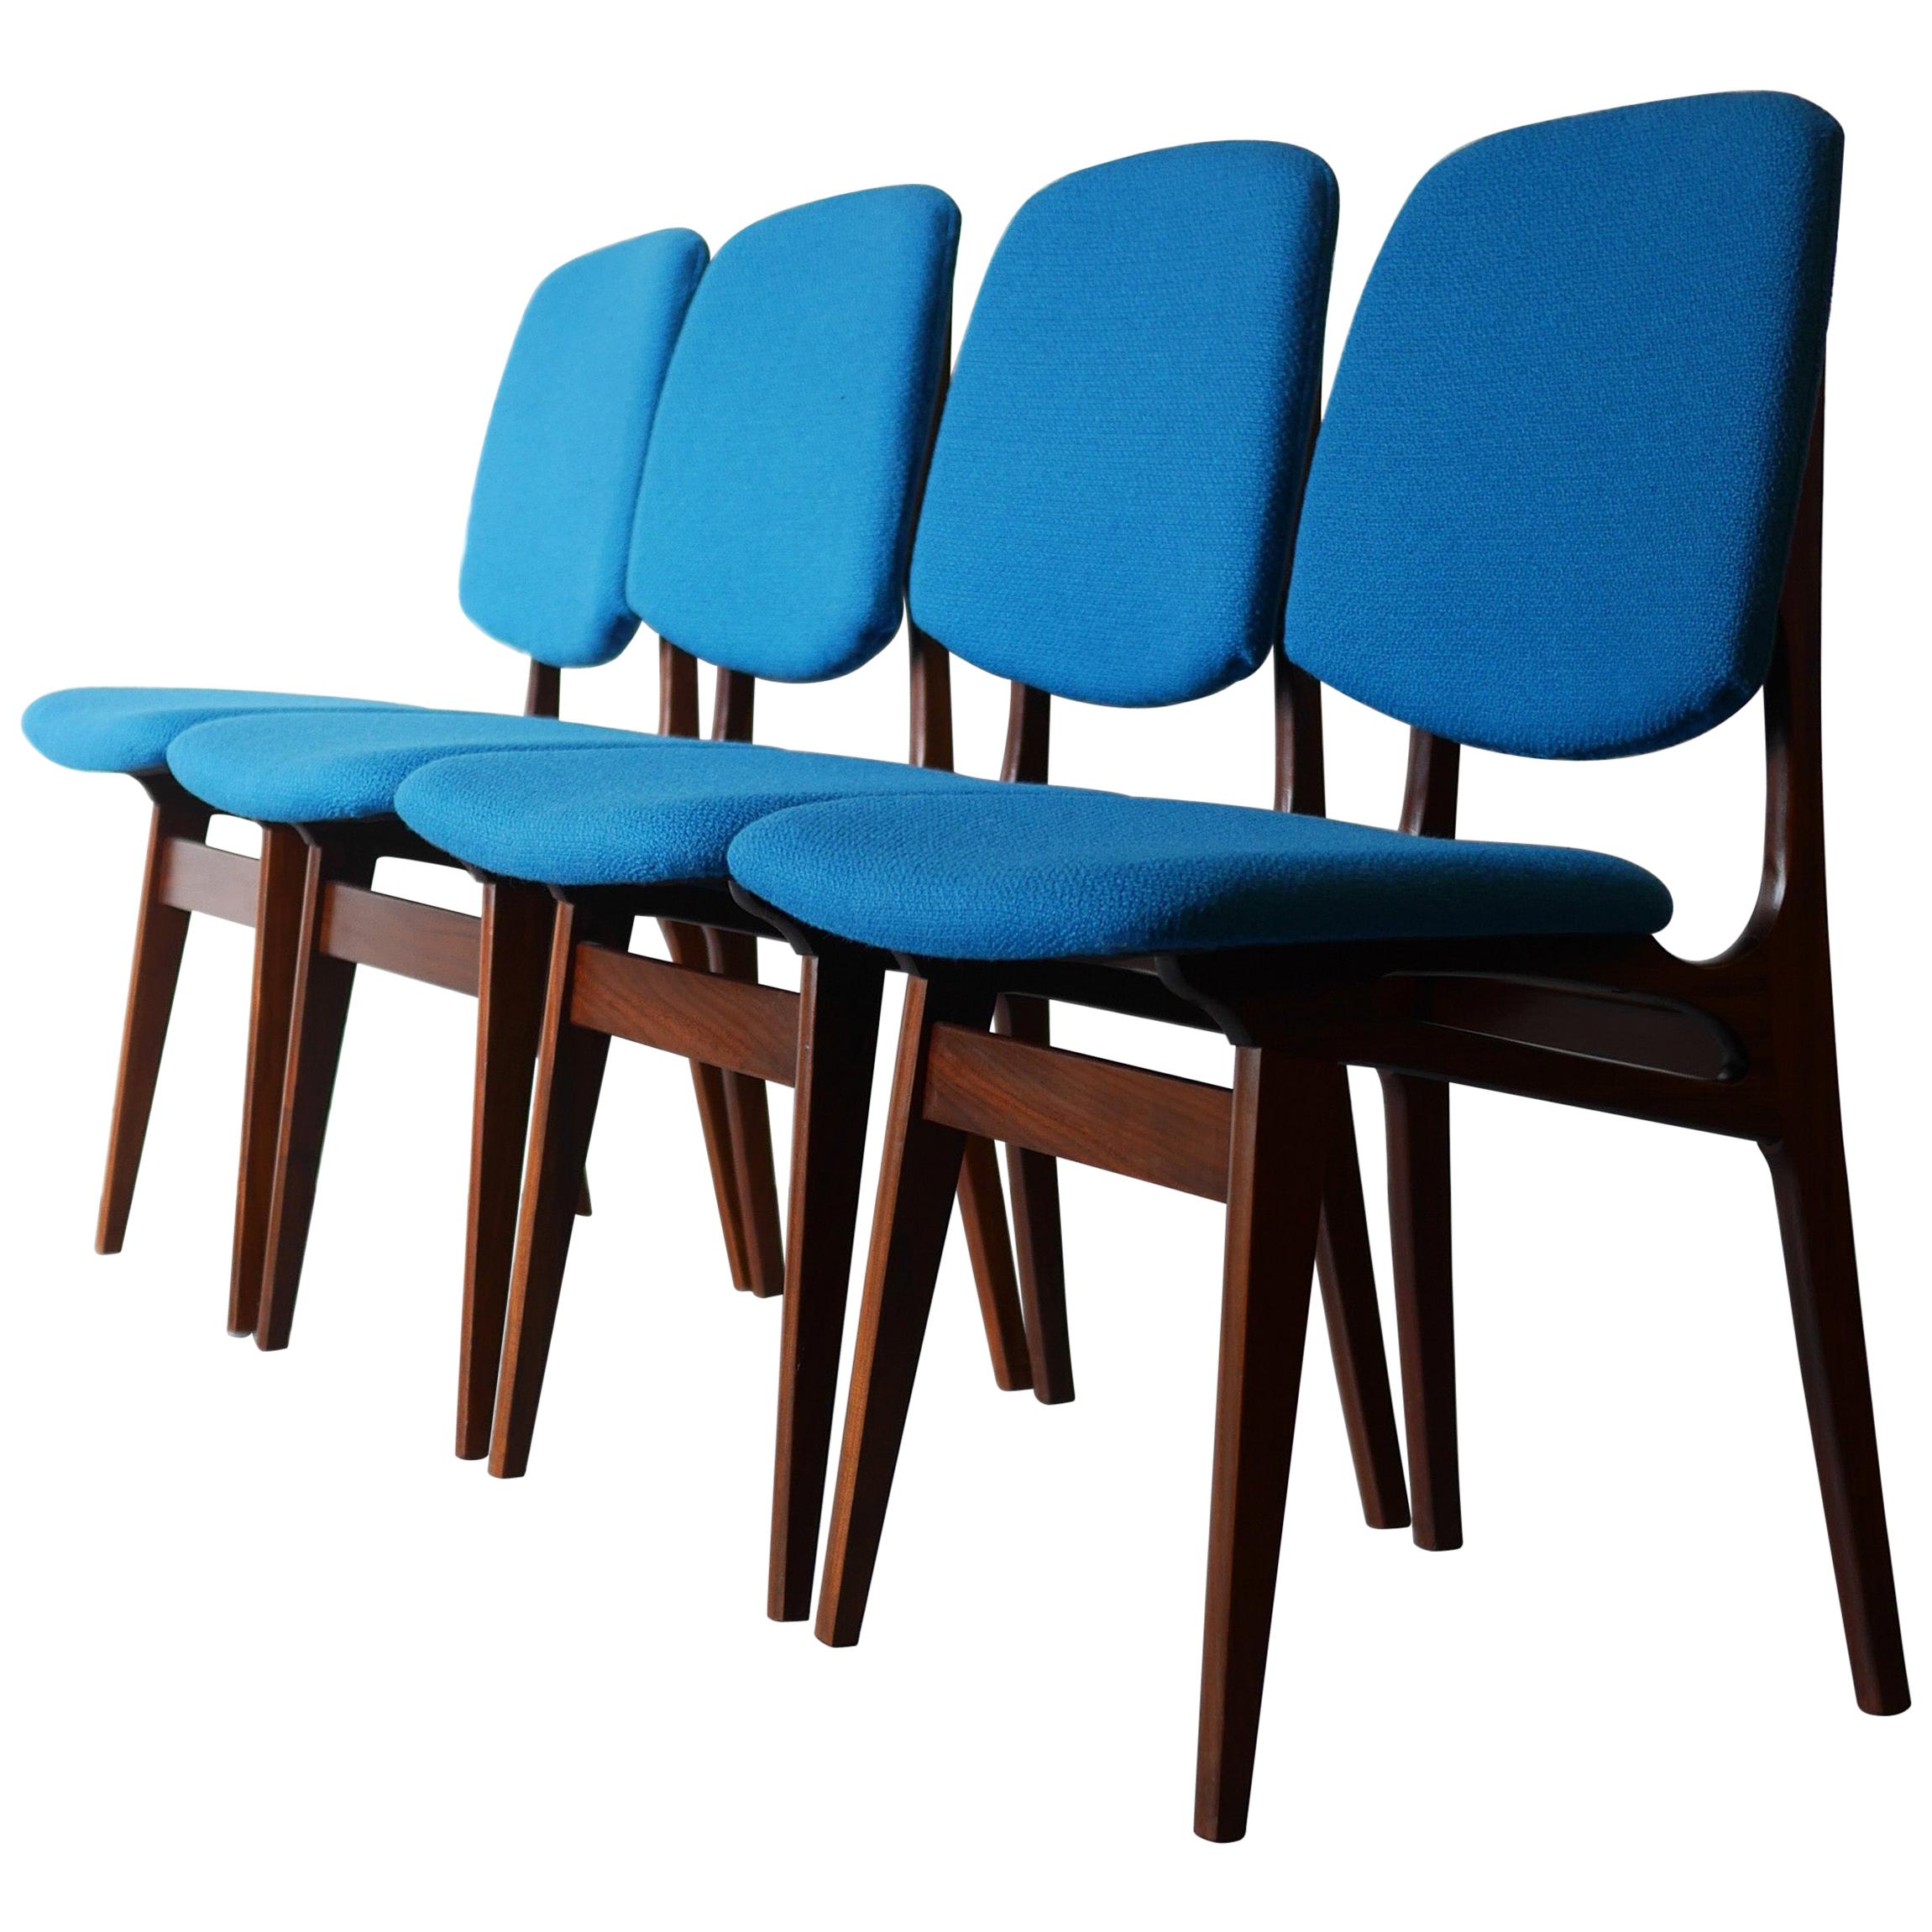 Set of Four Solid Afrormosia Dining Chairs with Blue Wool Upholstery, circa 1961 For Sale